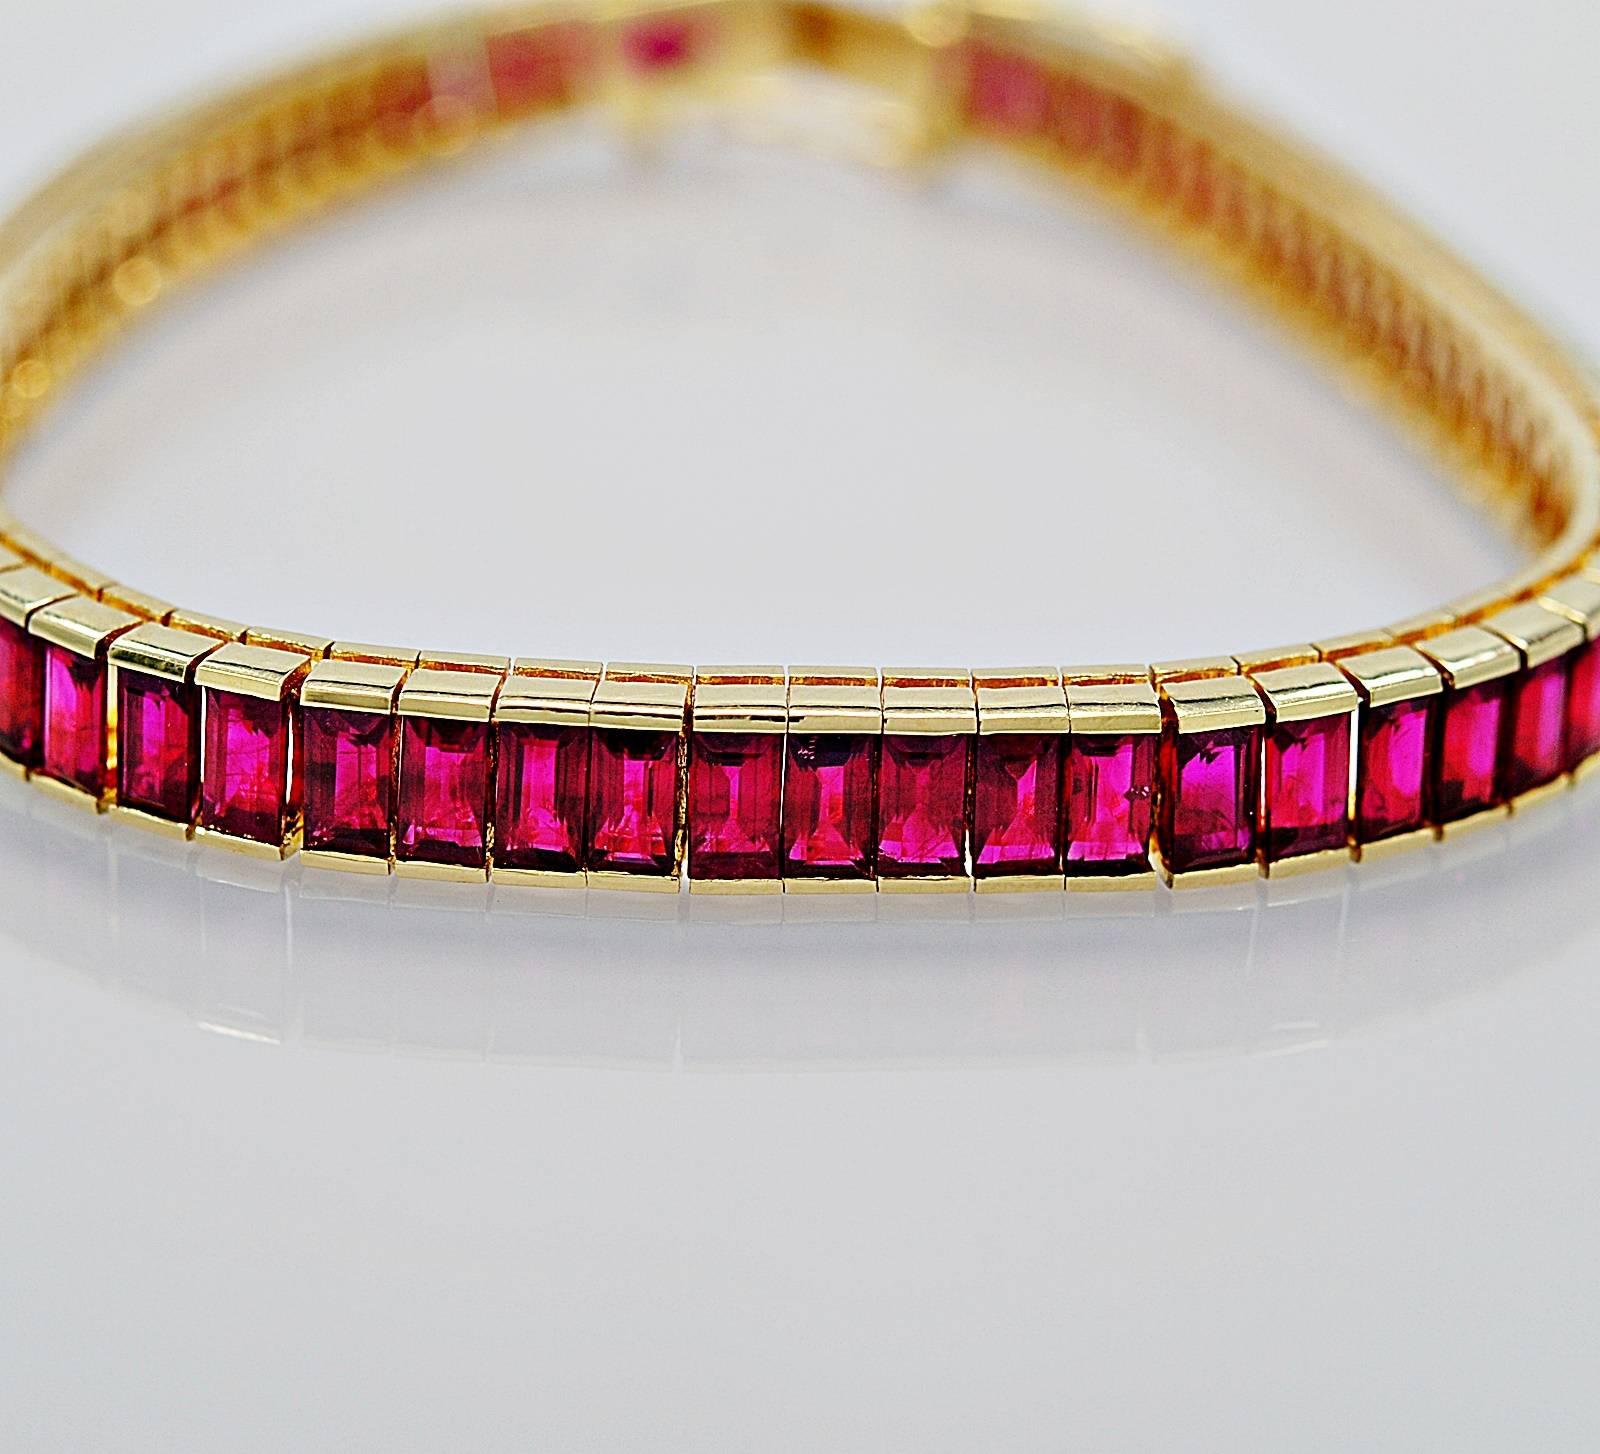 A magnificent straight line bracelet comprised of 20.00ct. apx. T.W. of perfectly matched Burma rubies. Incredibly rare and astounding, this bracelet would be impossible to duplicate in today's market. A must for someone wanting the best!